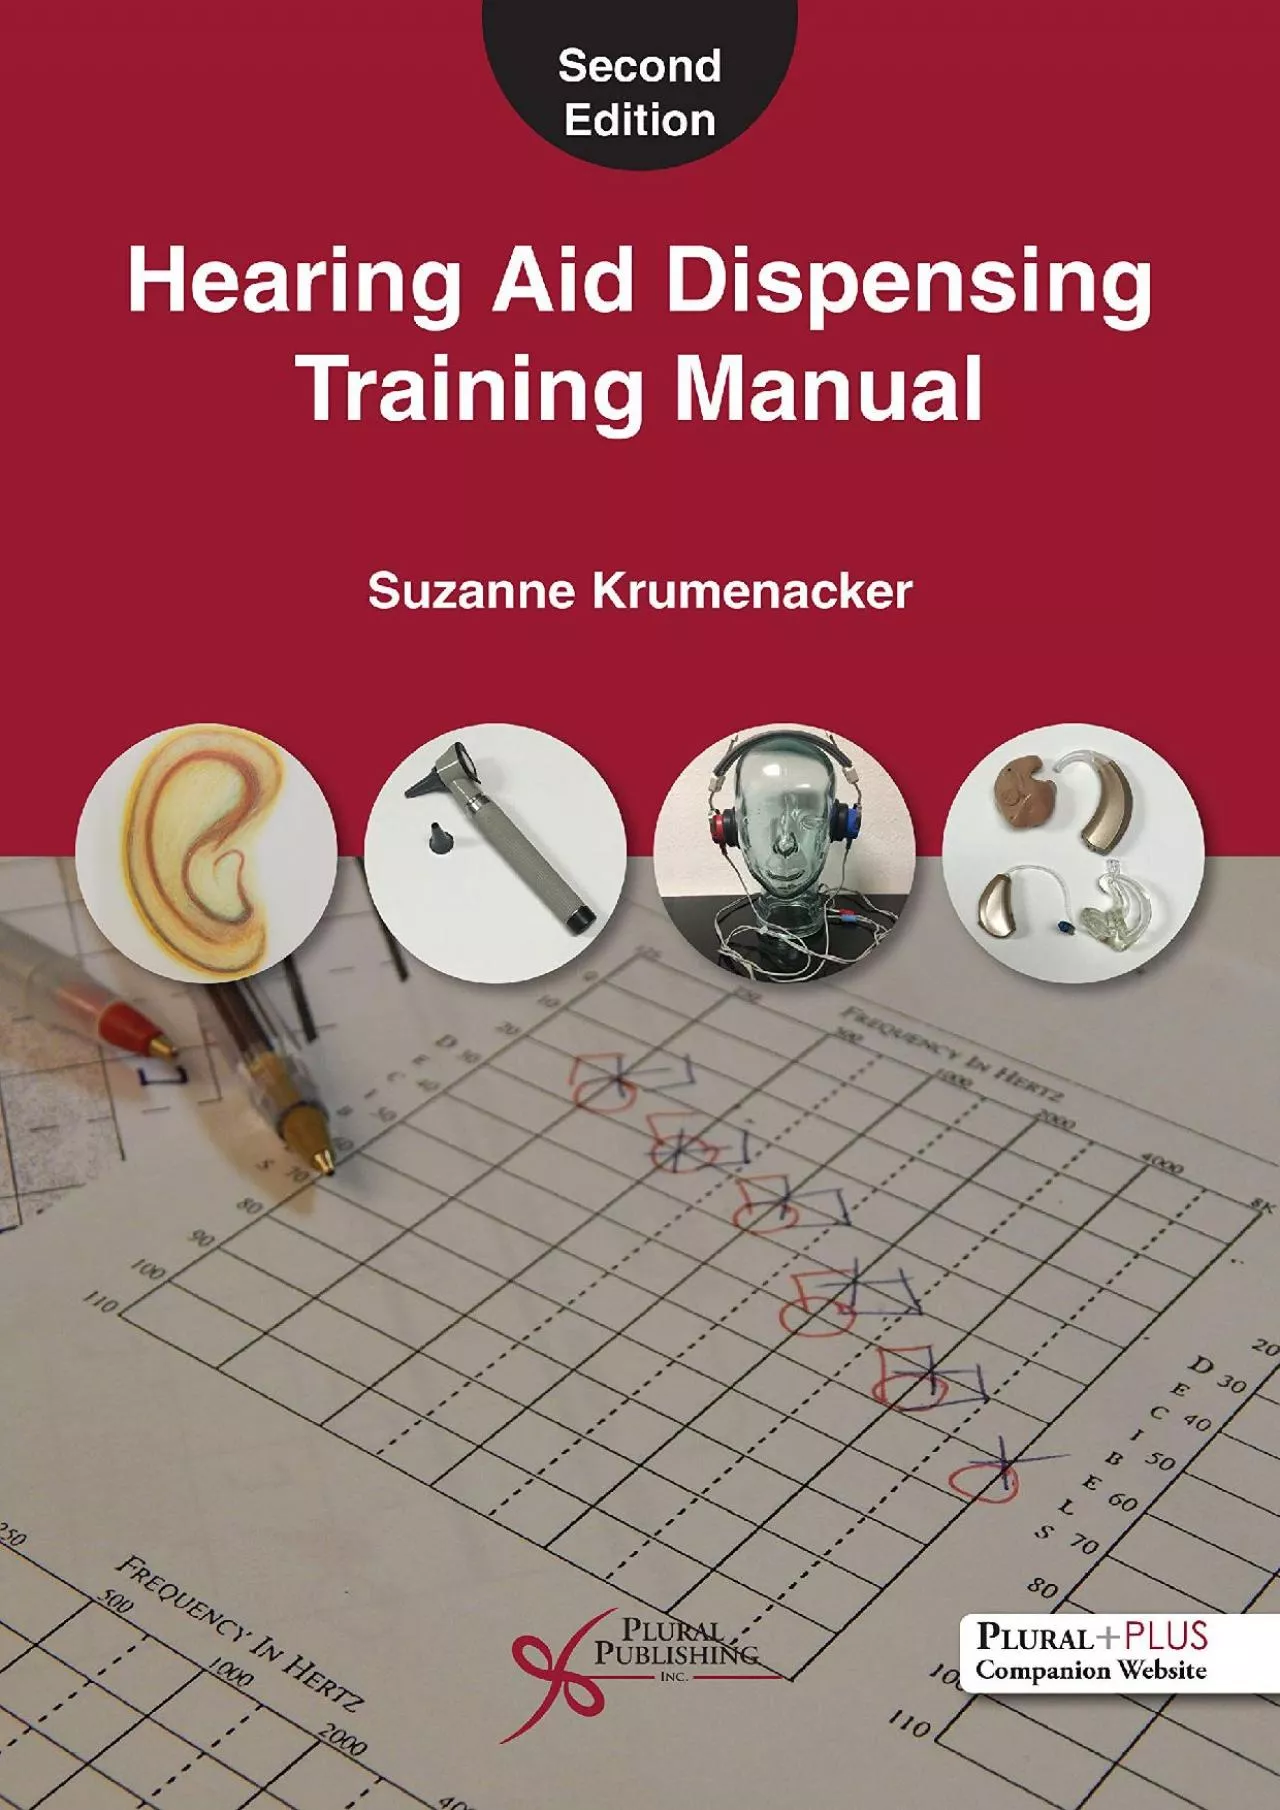 (BOOK)-Hearing Aid Dispensing Training Manual, Second Edition